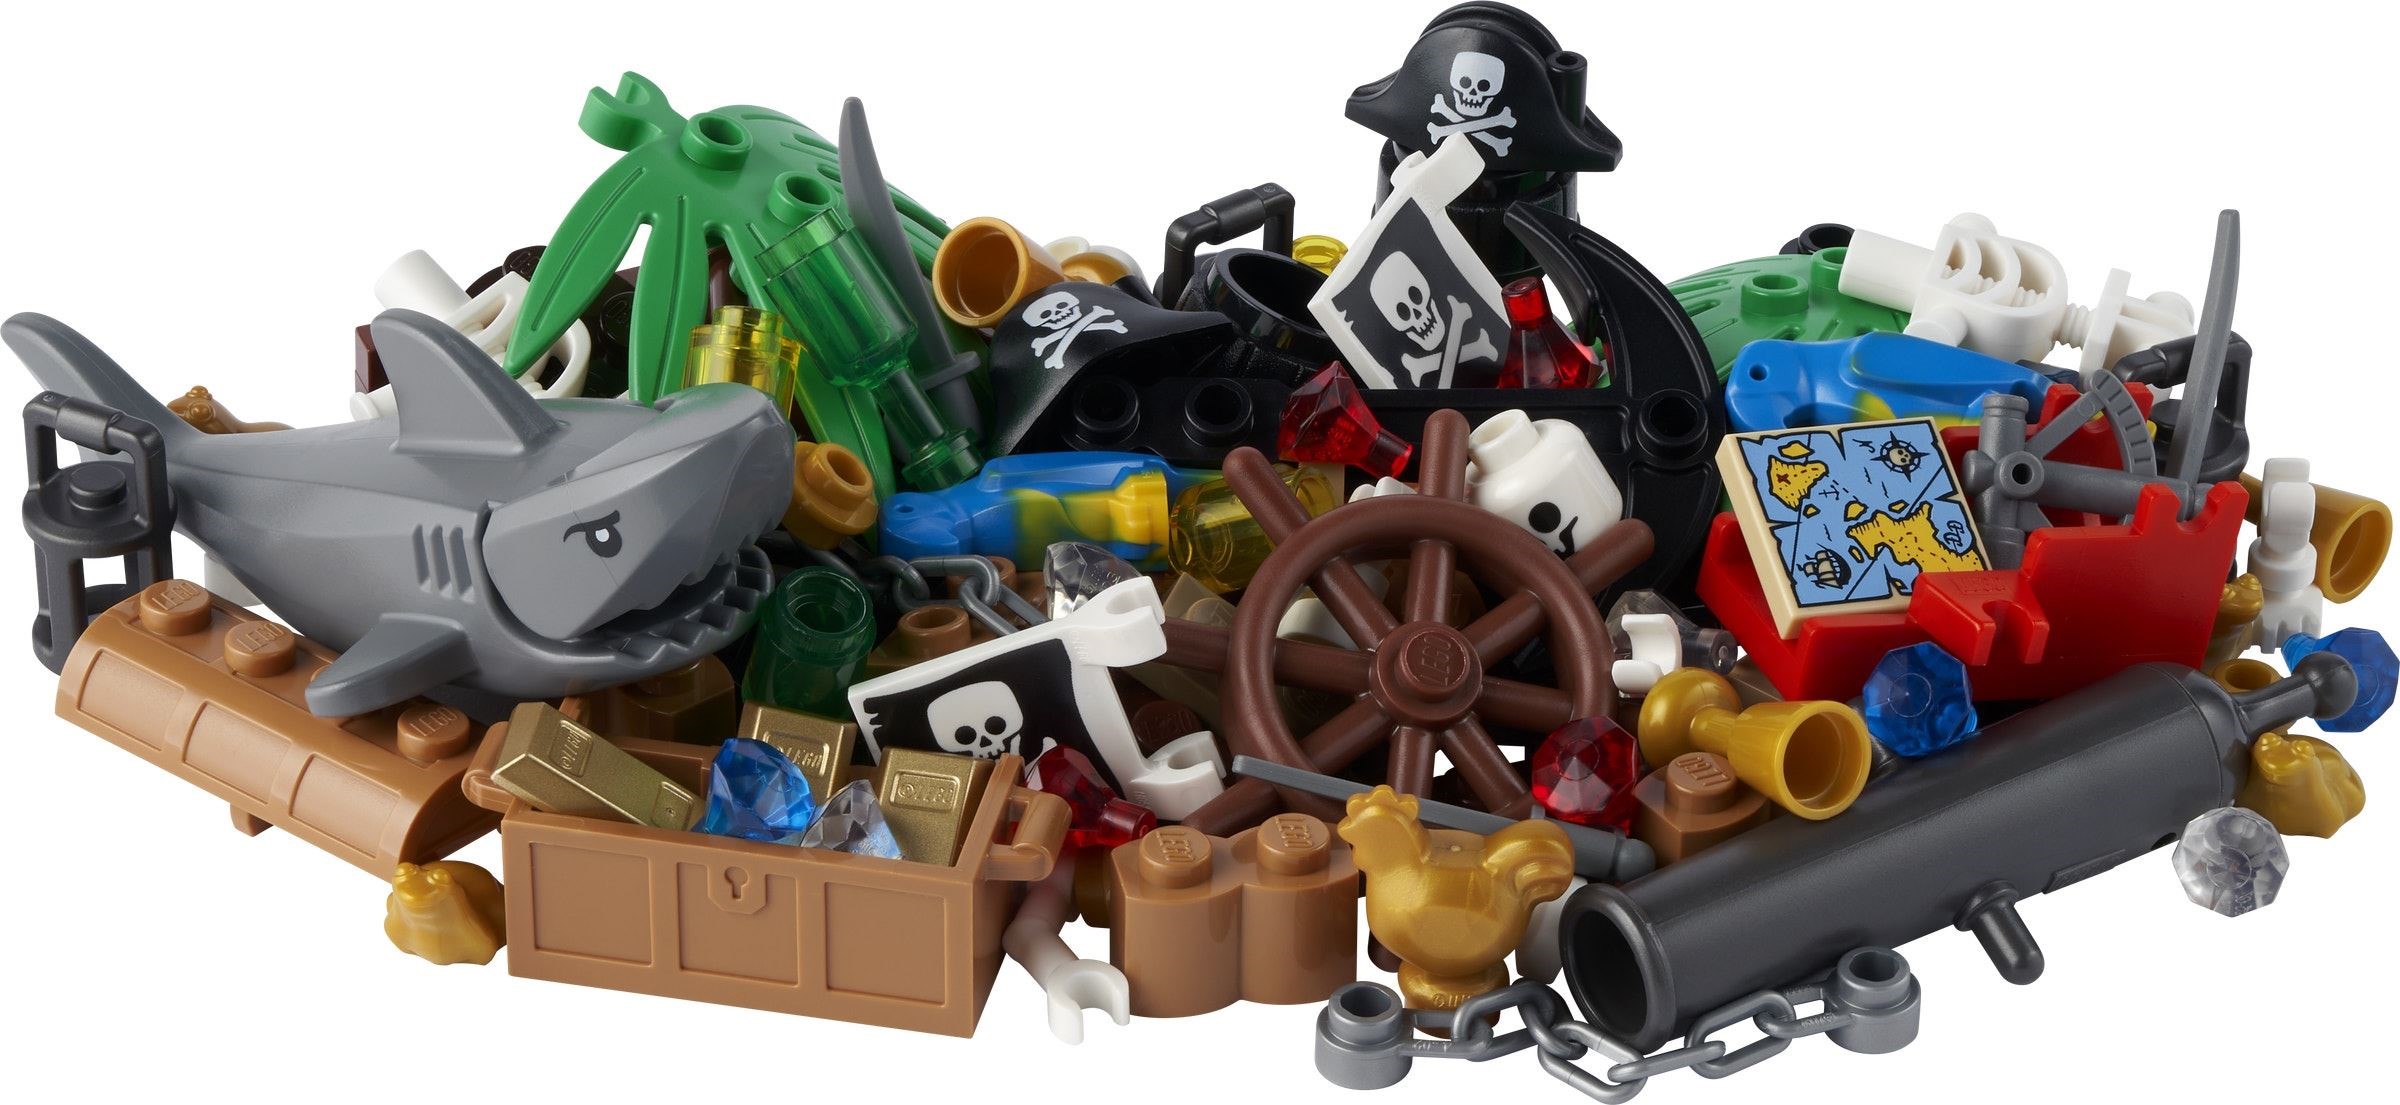 VIP add-on coming soon | Brickset: LEGO set guide and database